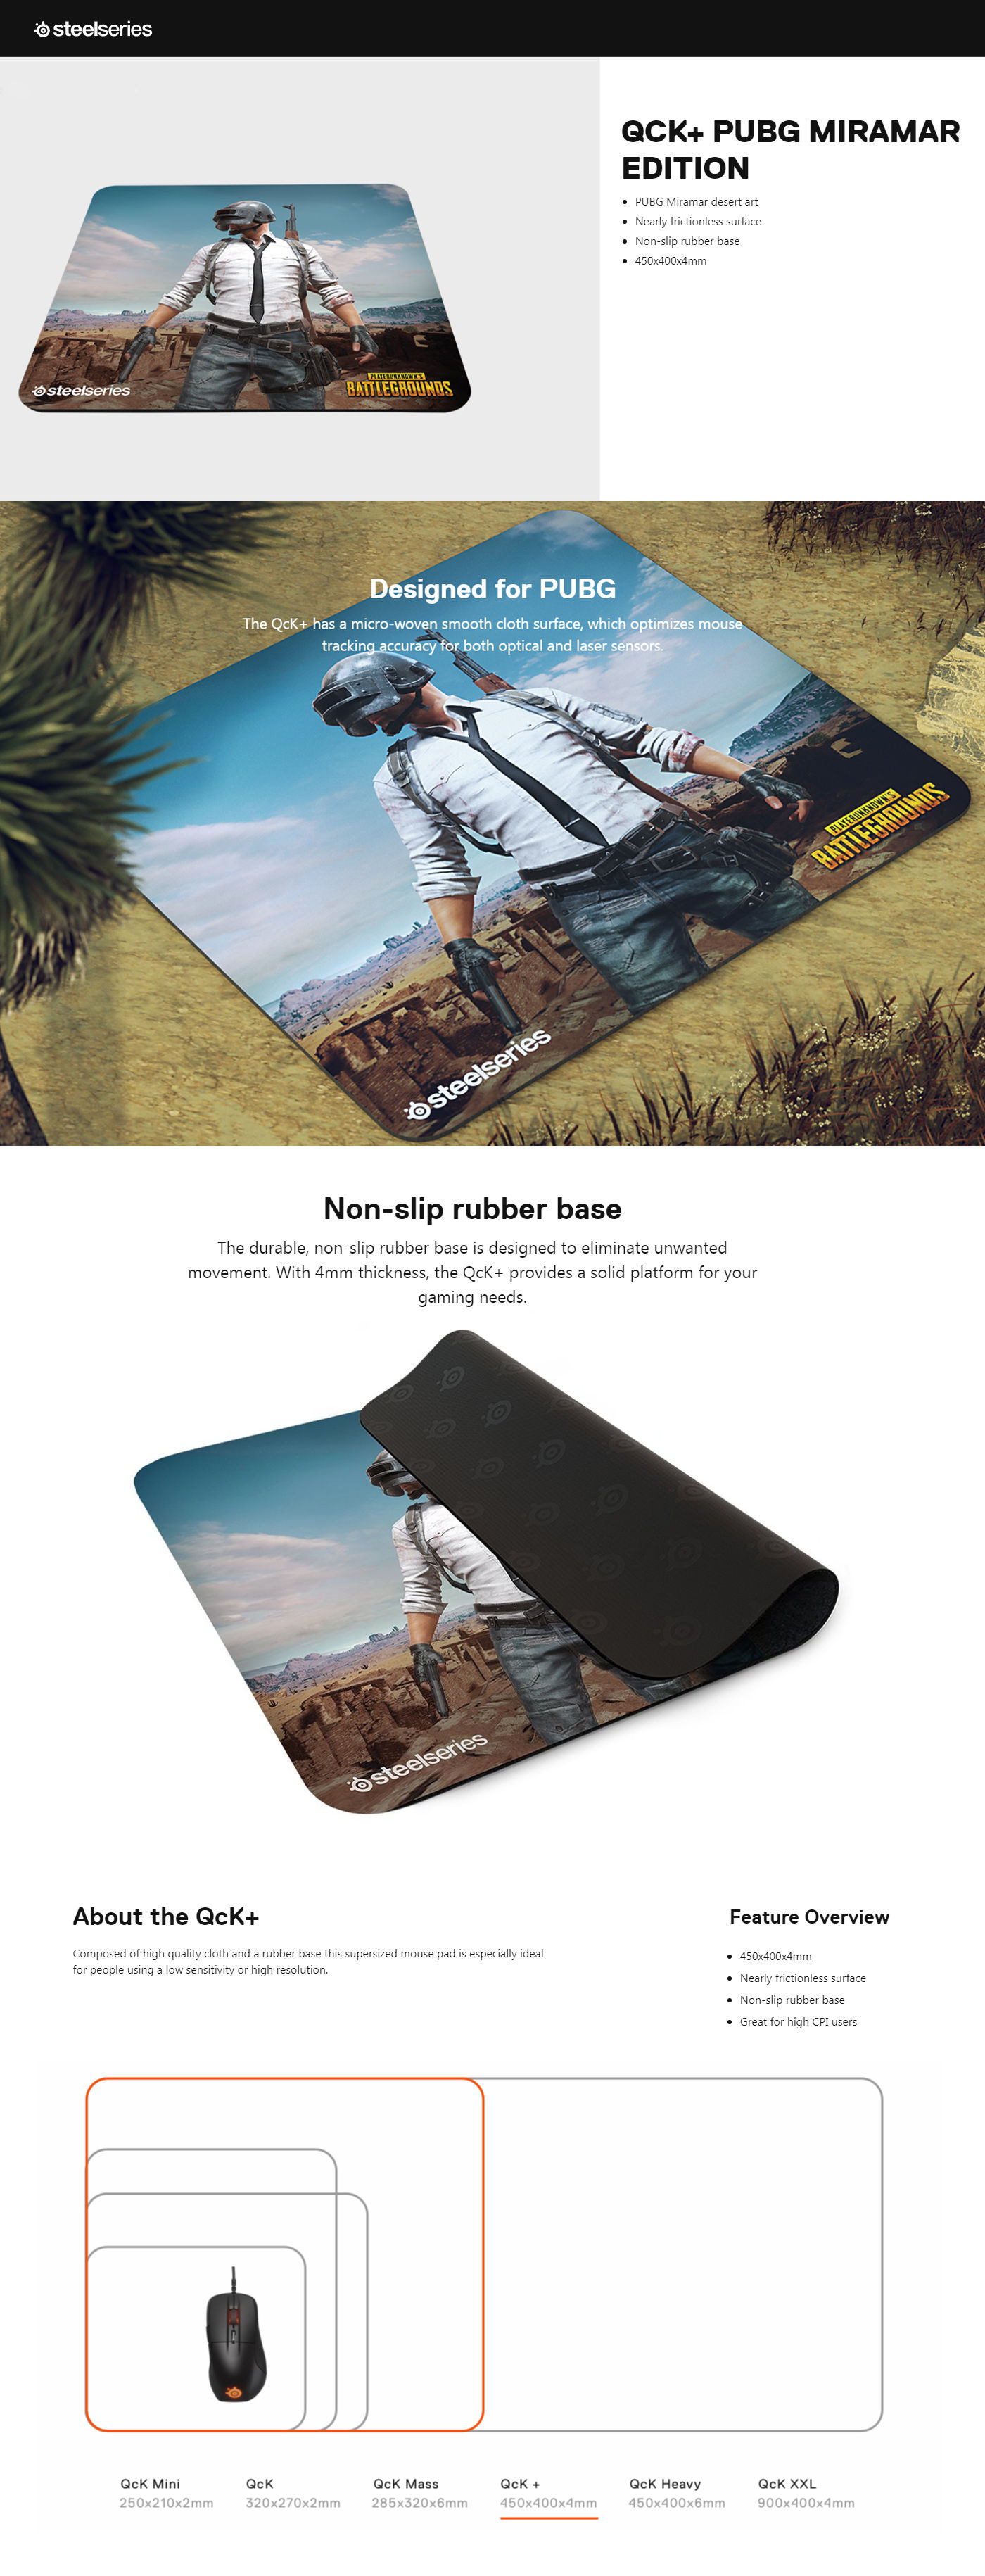  Buy Online SteelSeries Qck+ PUBG Miramar Edition Gaming Mouse Mat (63808)